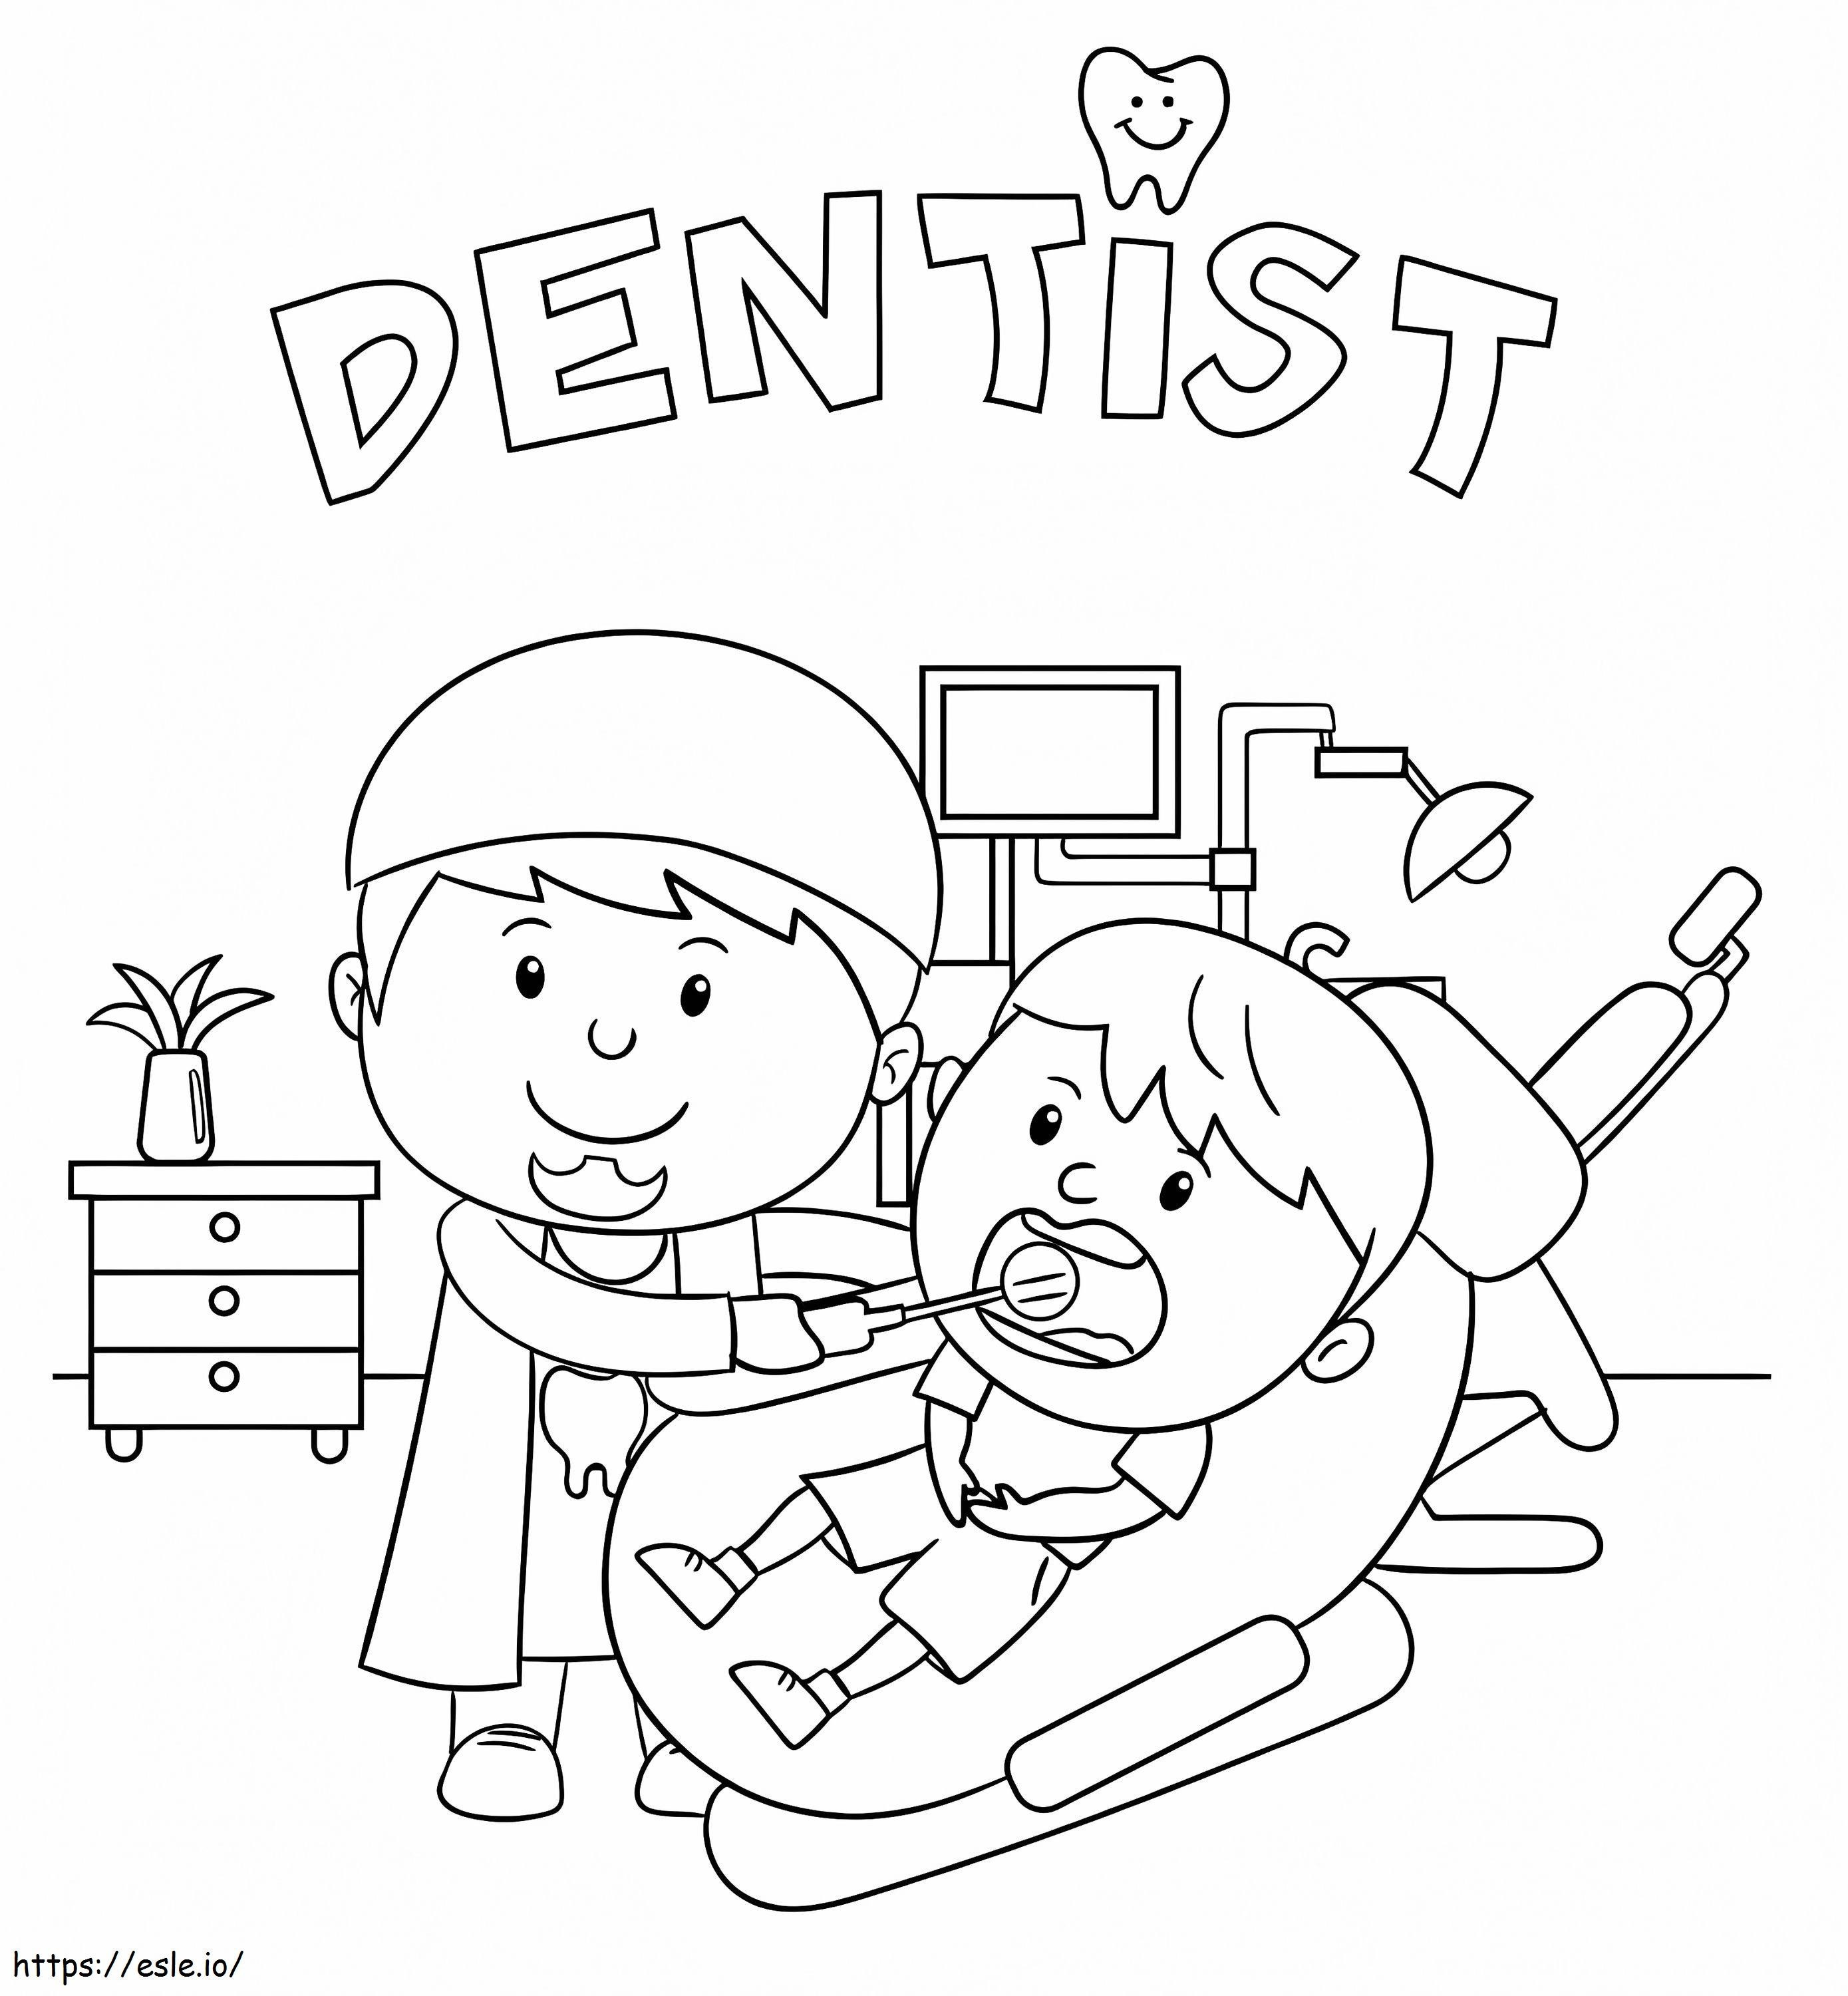 Boy And Dentist coloring page